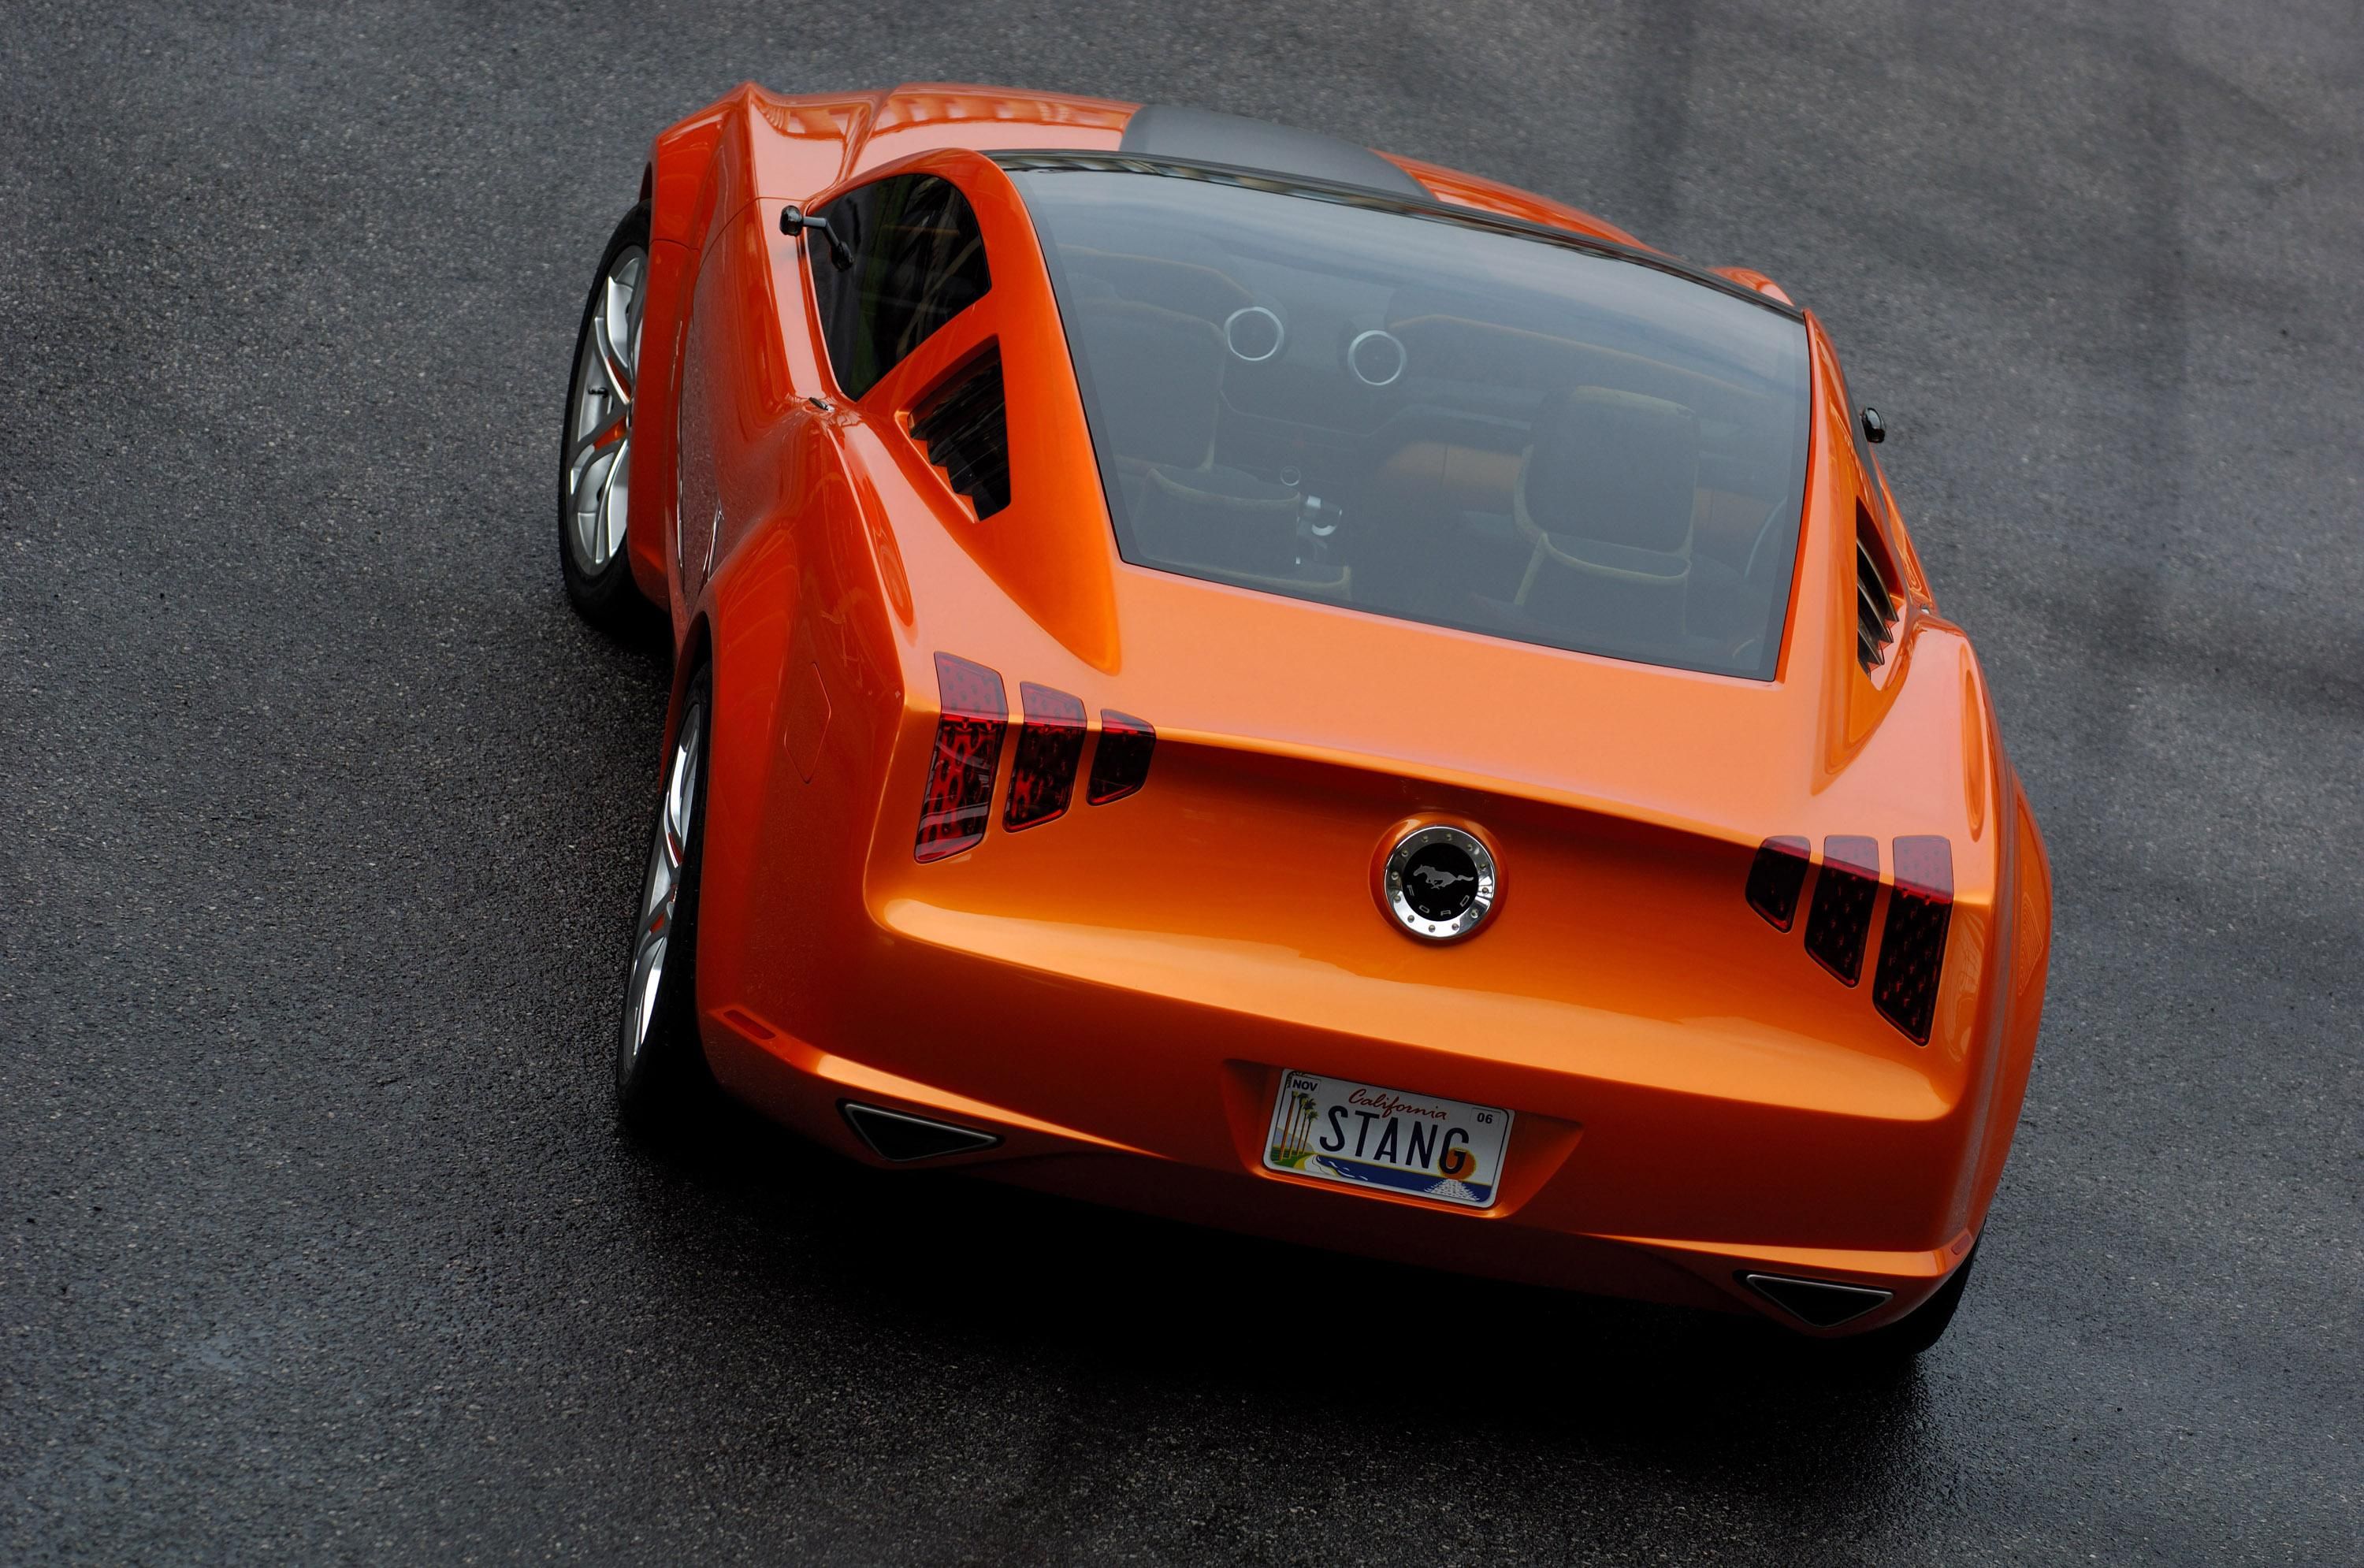 Ford Mustang Giugiaro Concept on the road